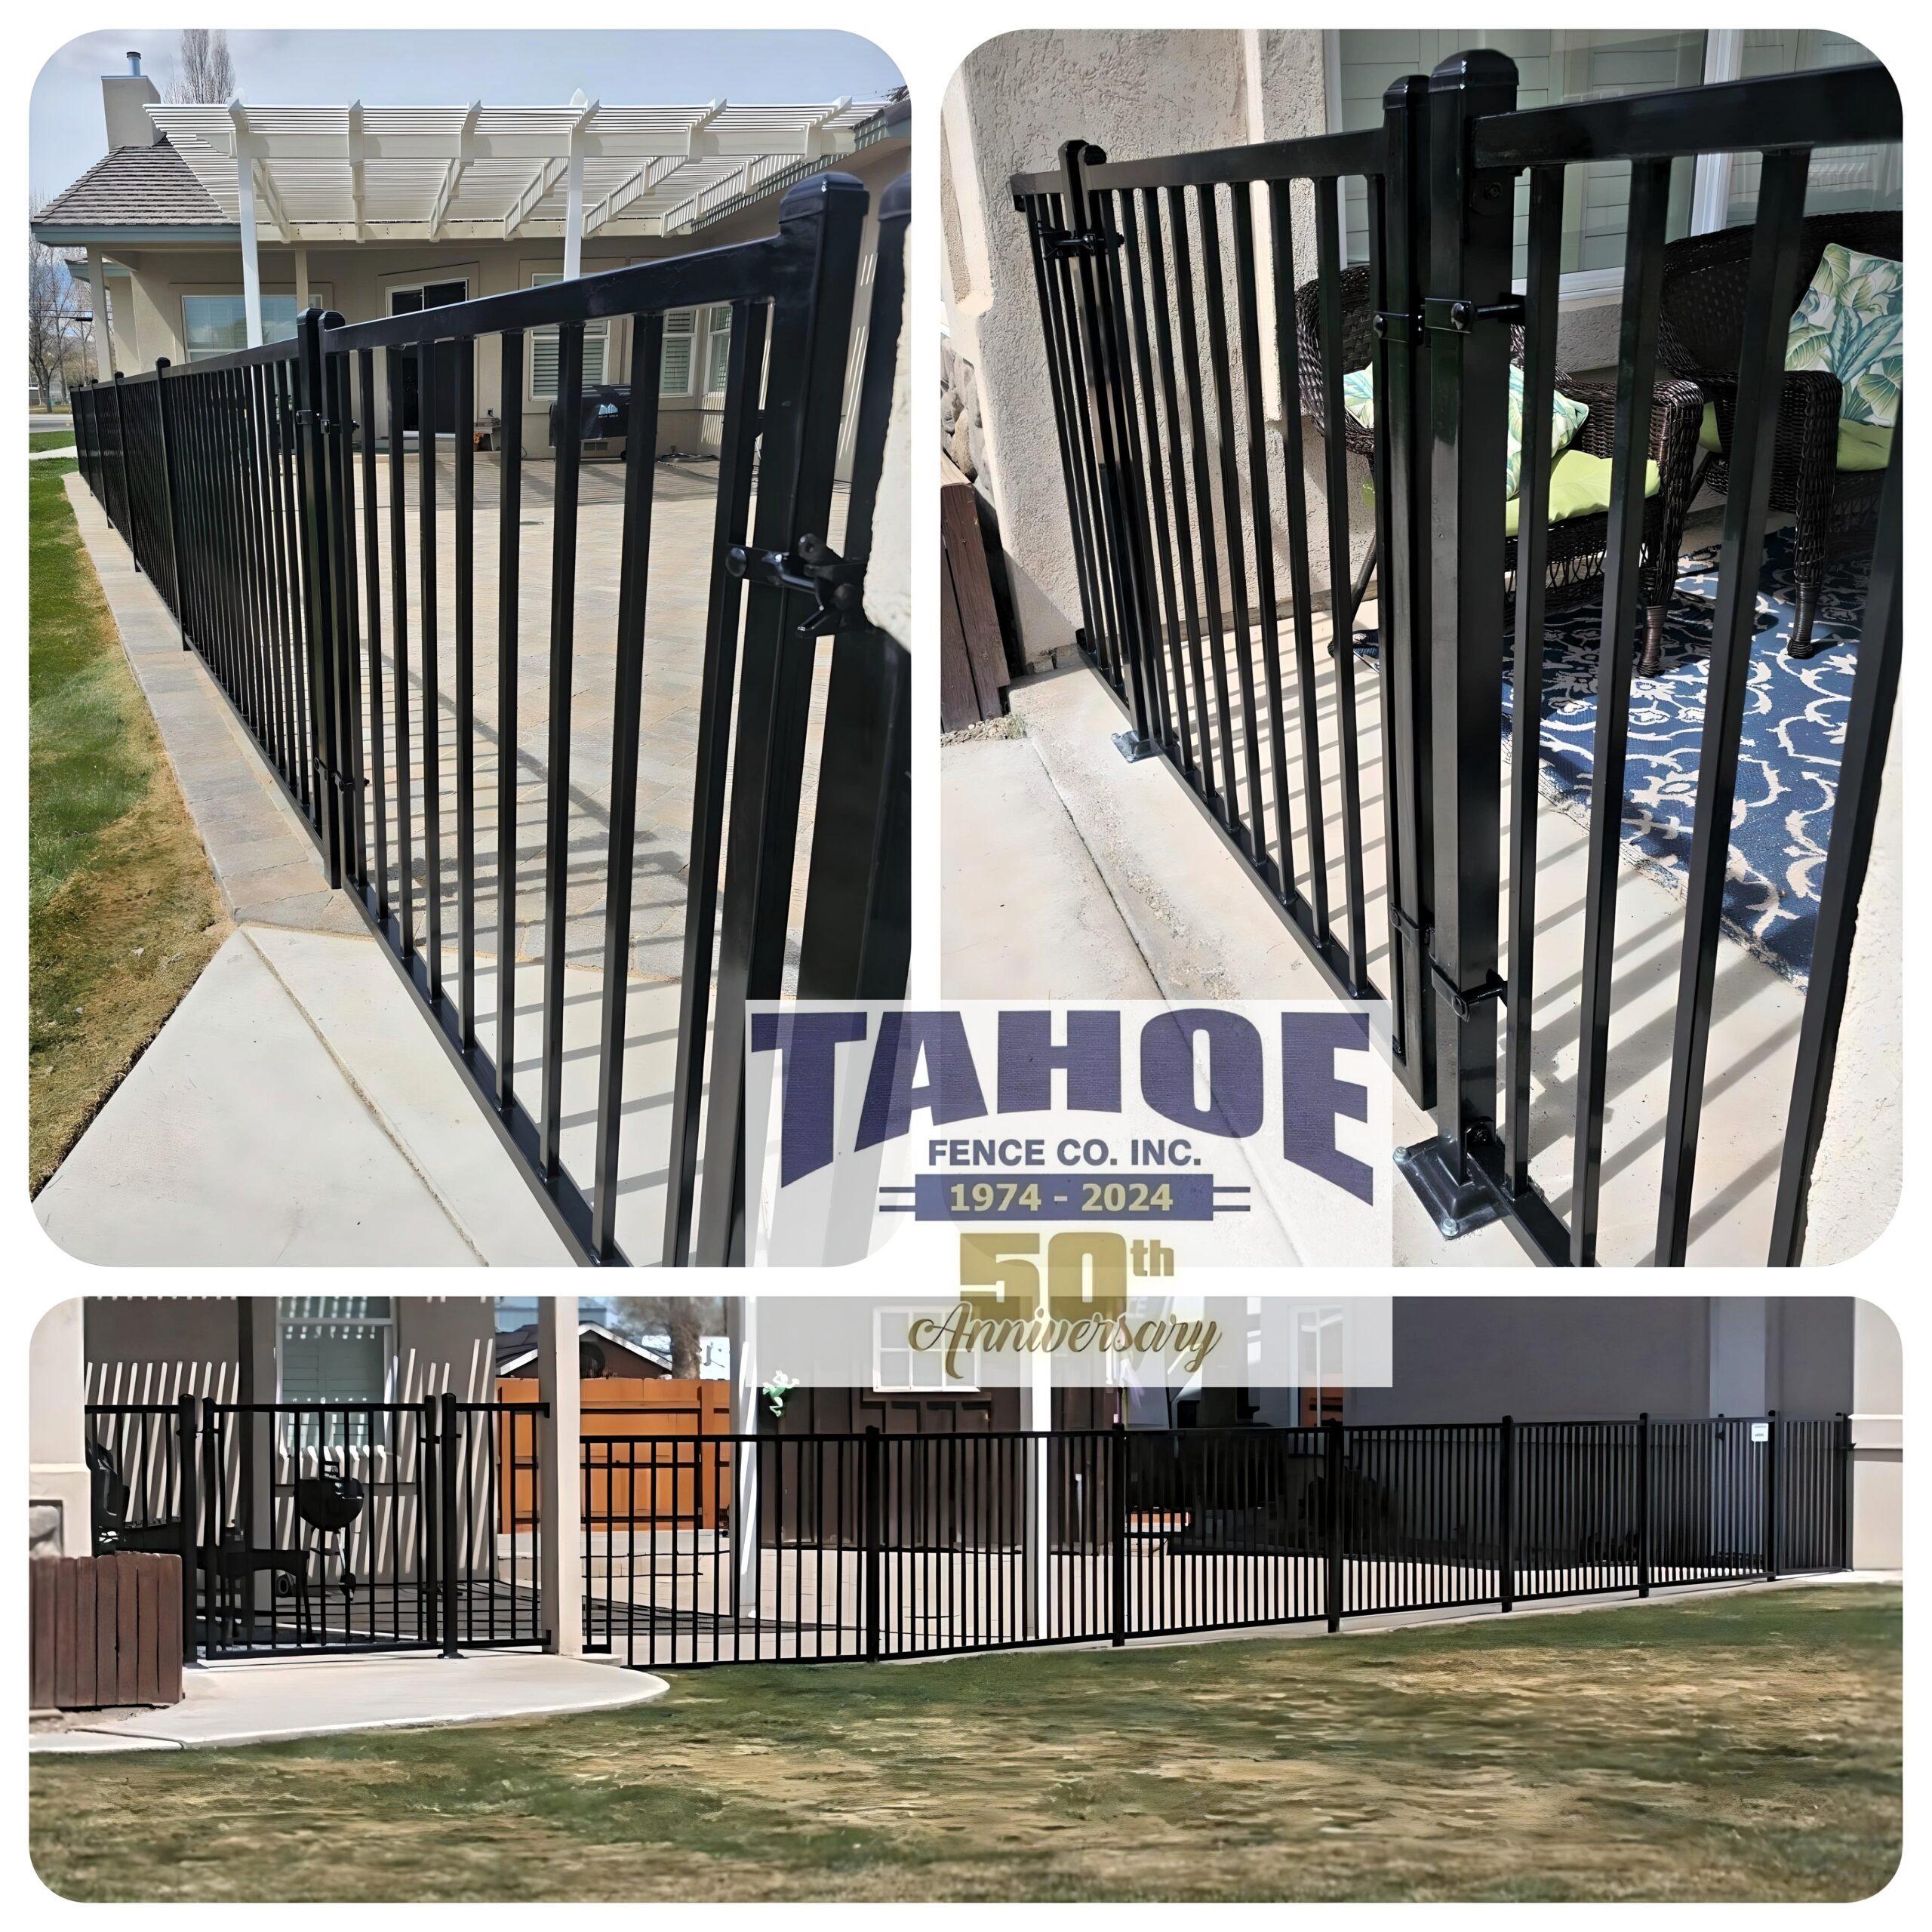 Patio Perfect 

The weather has been beautiful lately. Hope you have your own perfect space to relax and enjoy it.

Pictured: Ornamental iron by Tahoe securing courtyard patio in Yerington (Lyon County.)